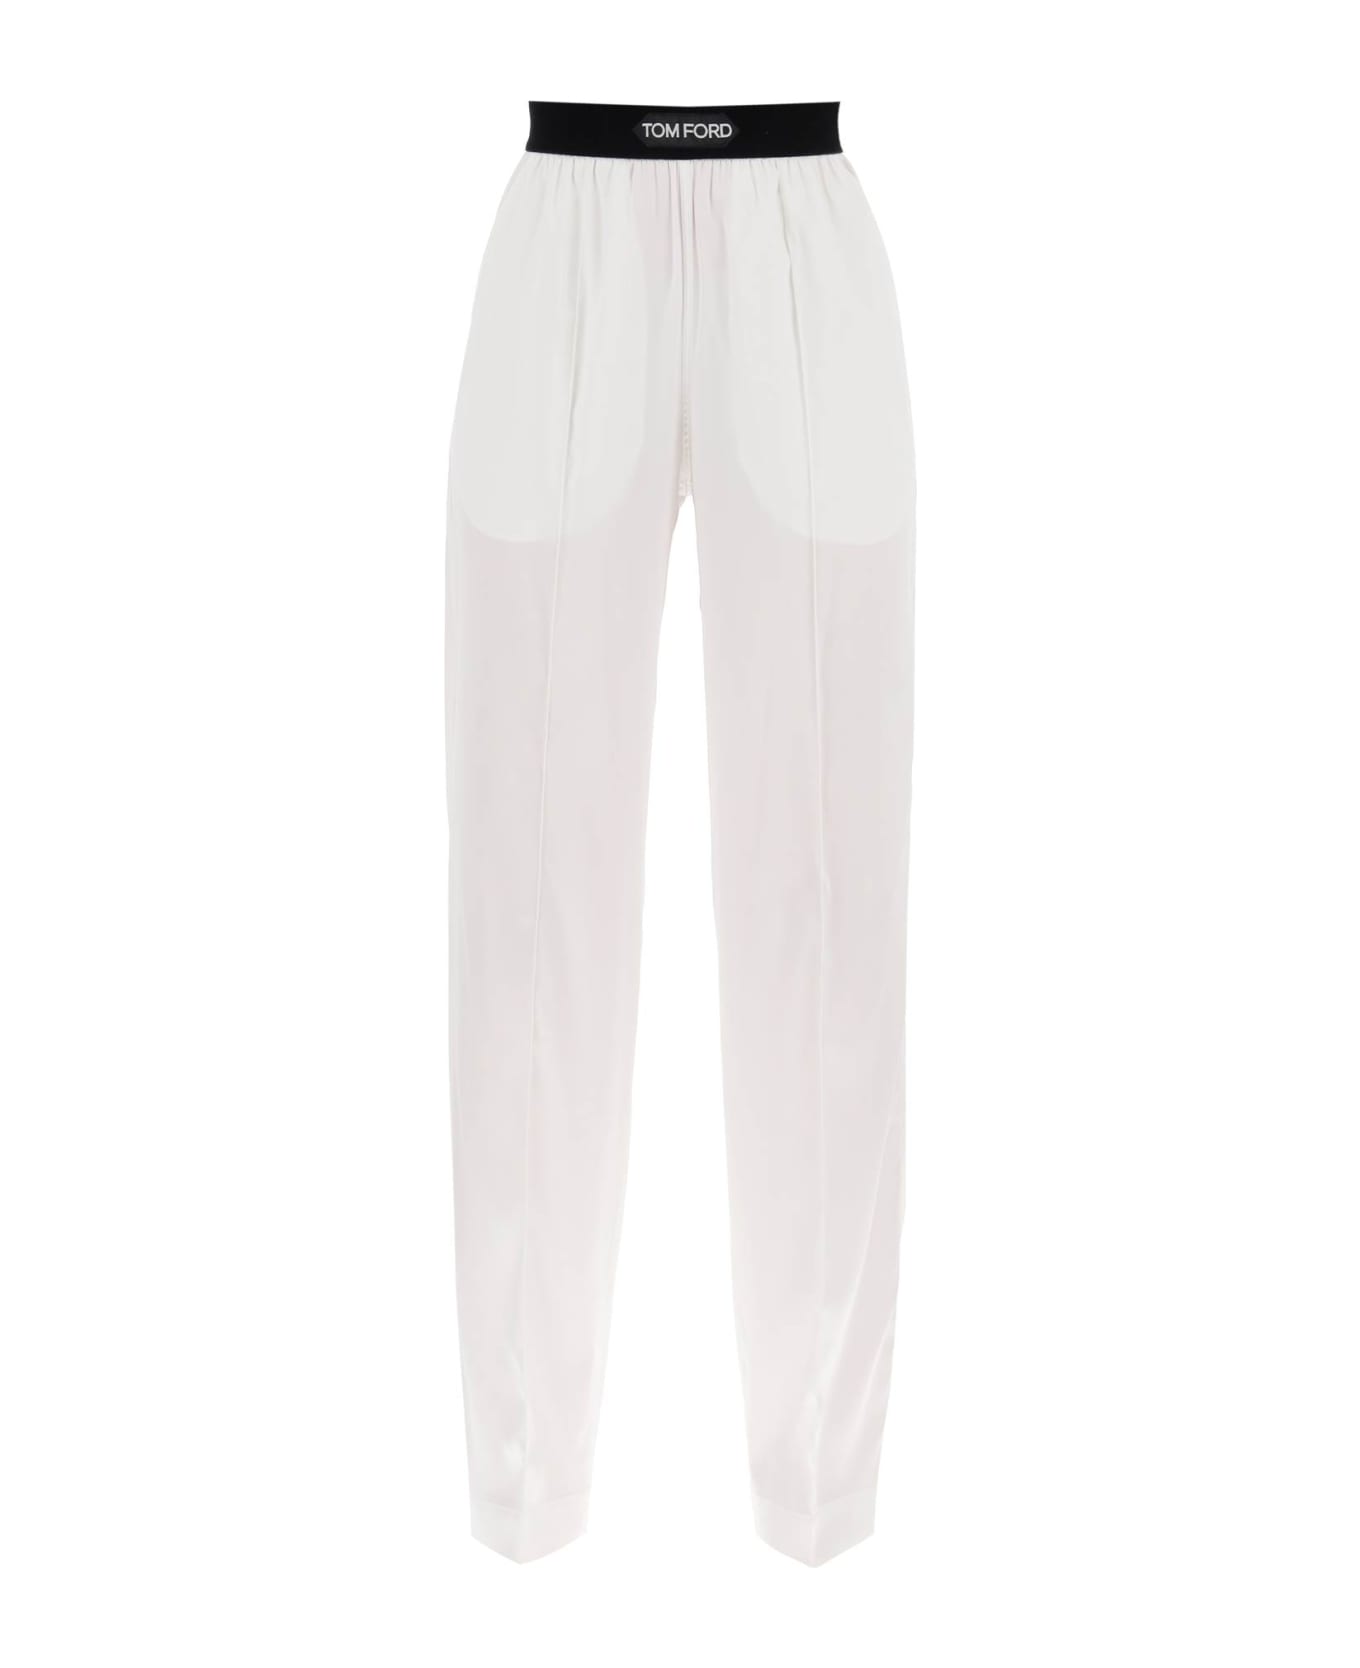 Tom Ford Silk Trousers - White